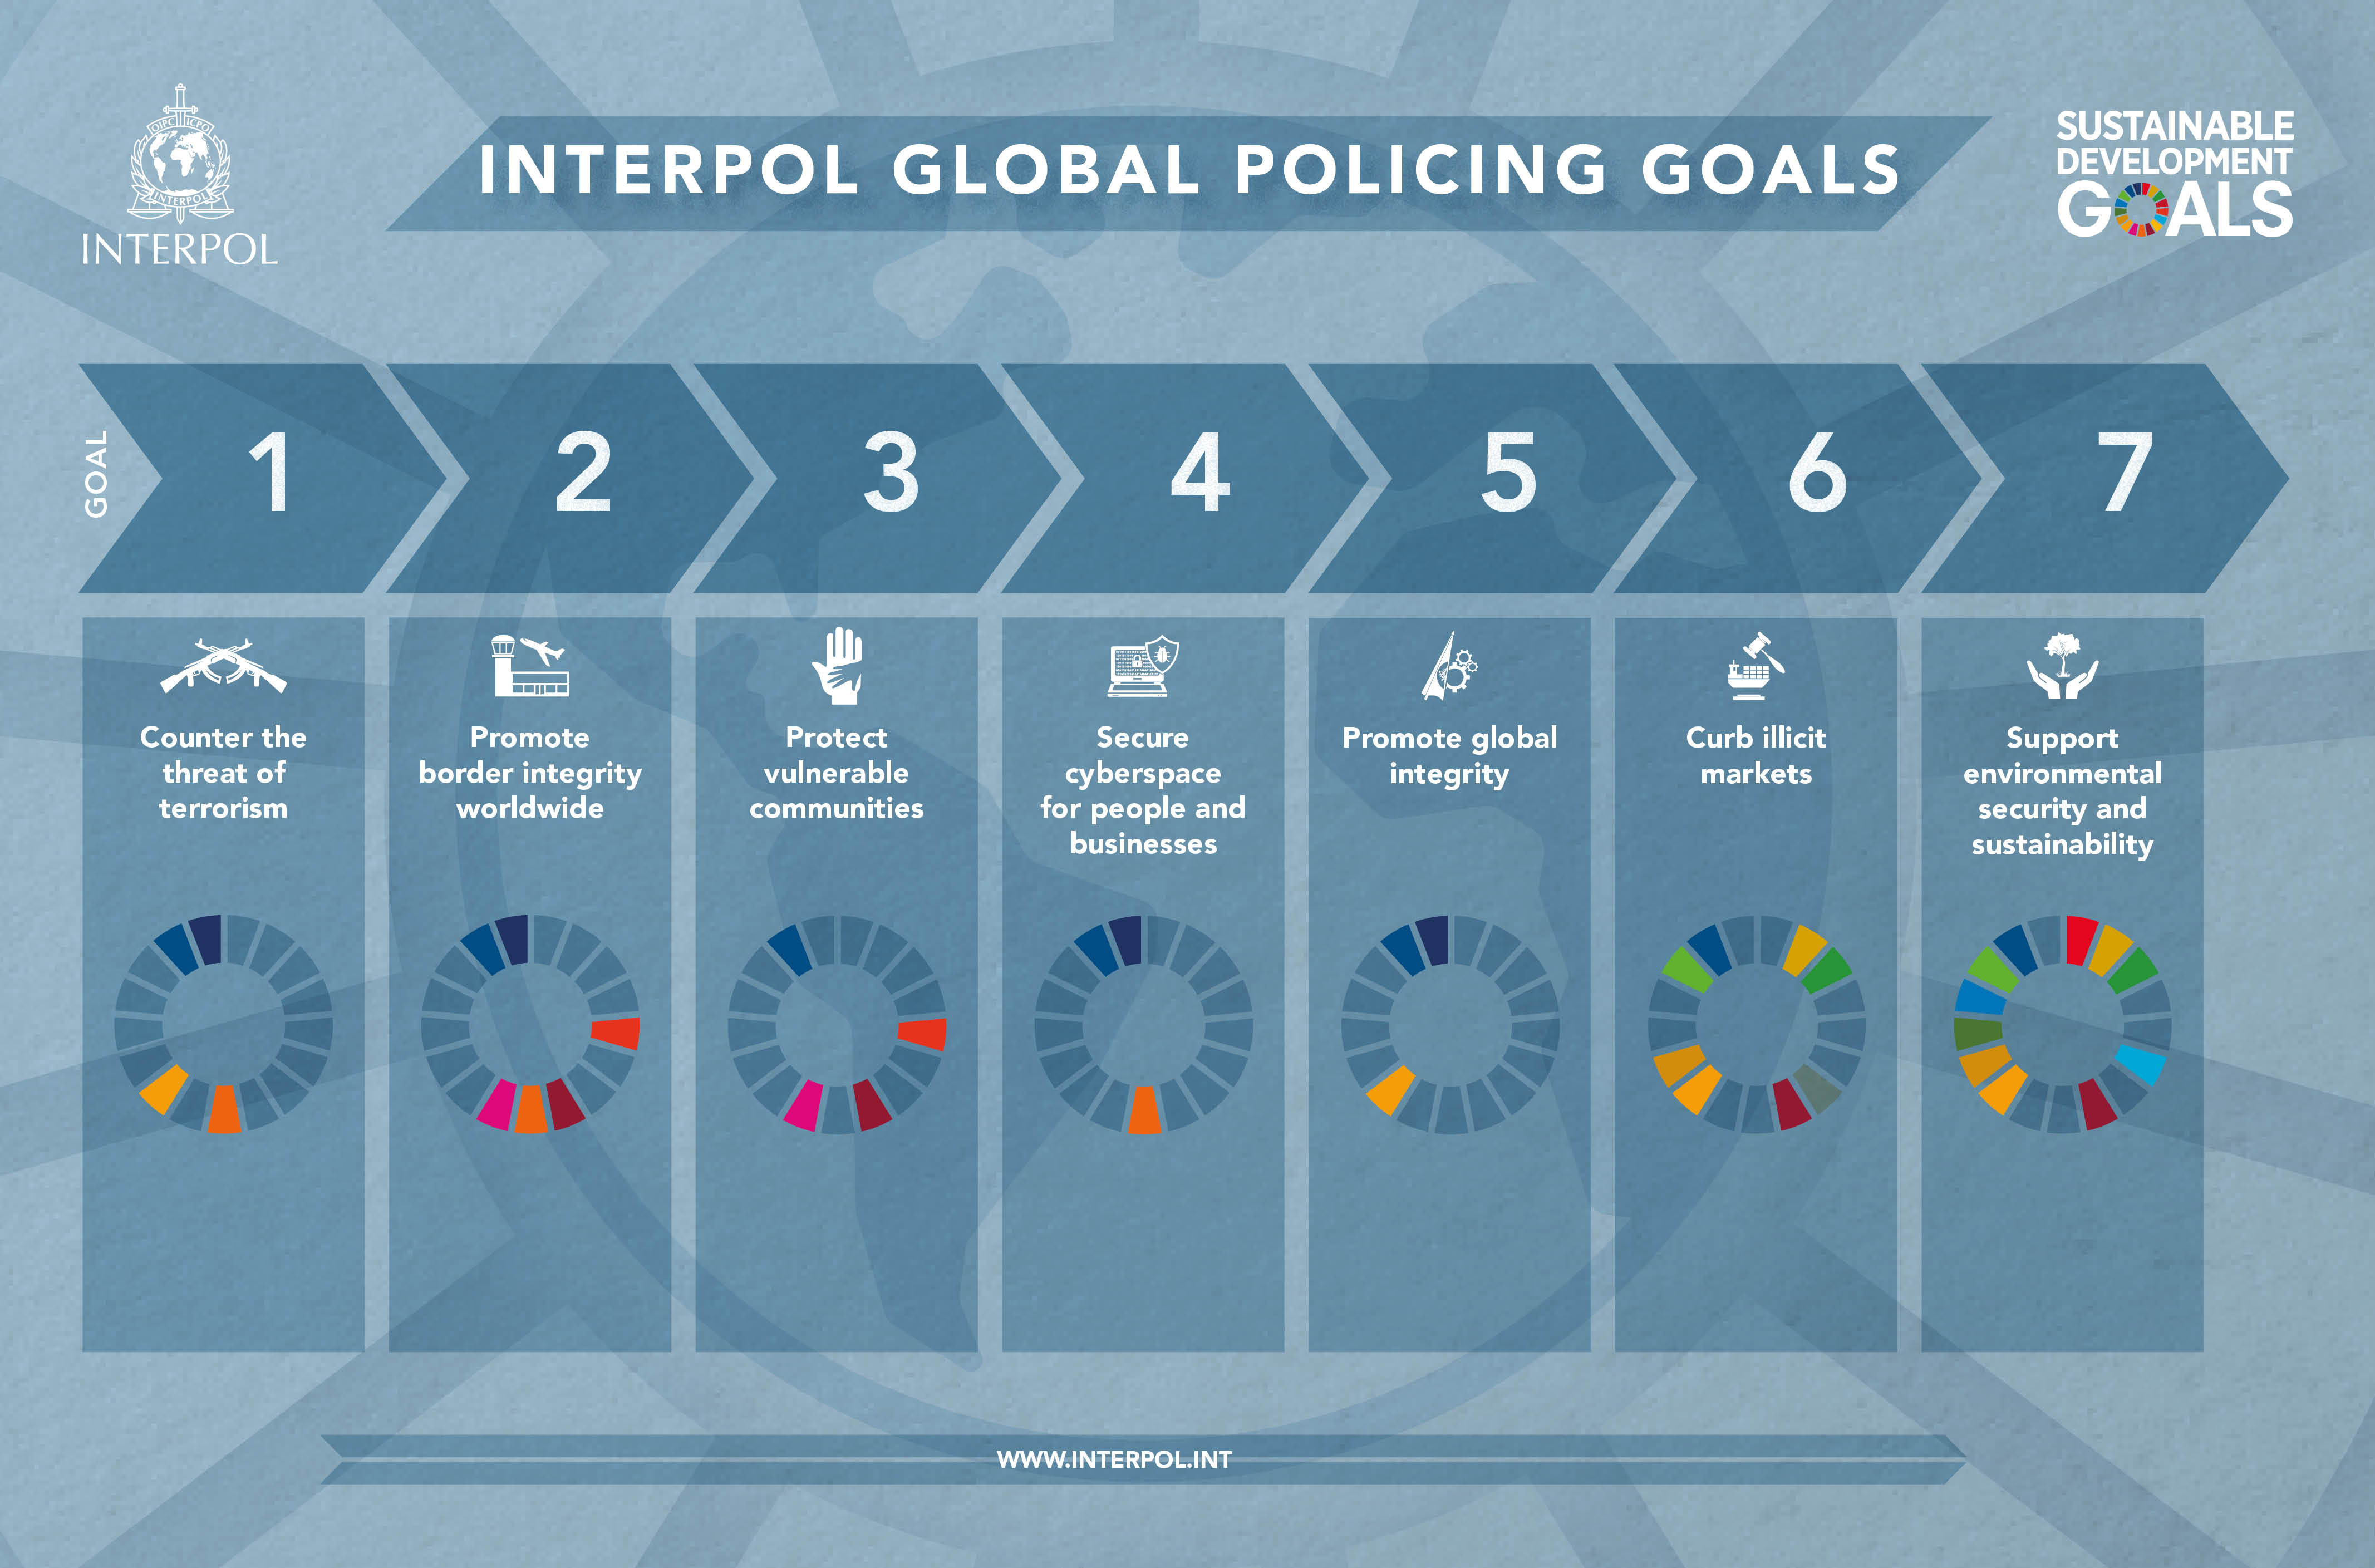 INTERPOL's Global Policing Goals